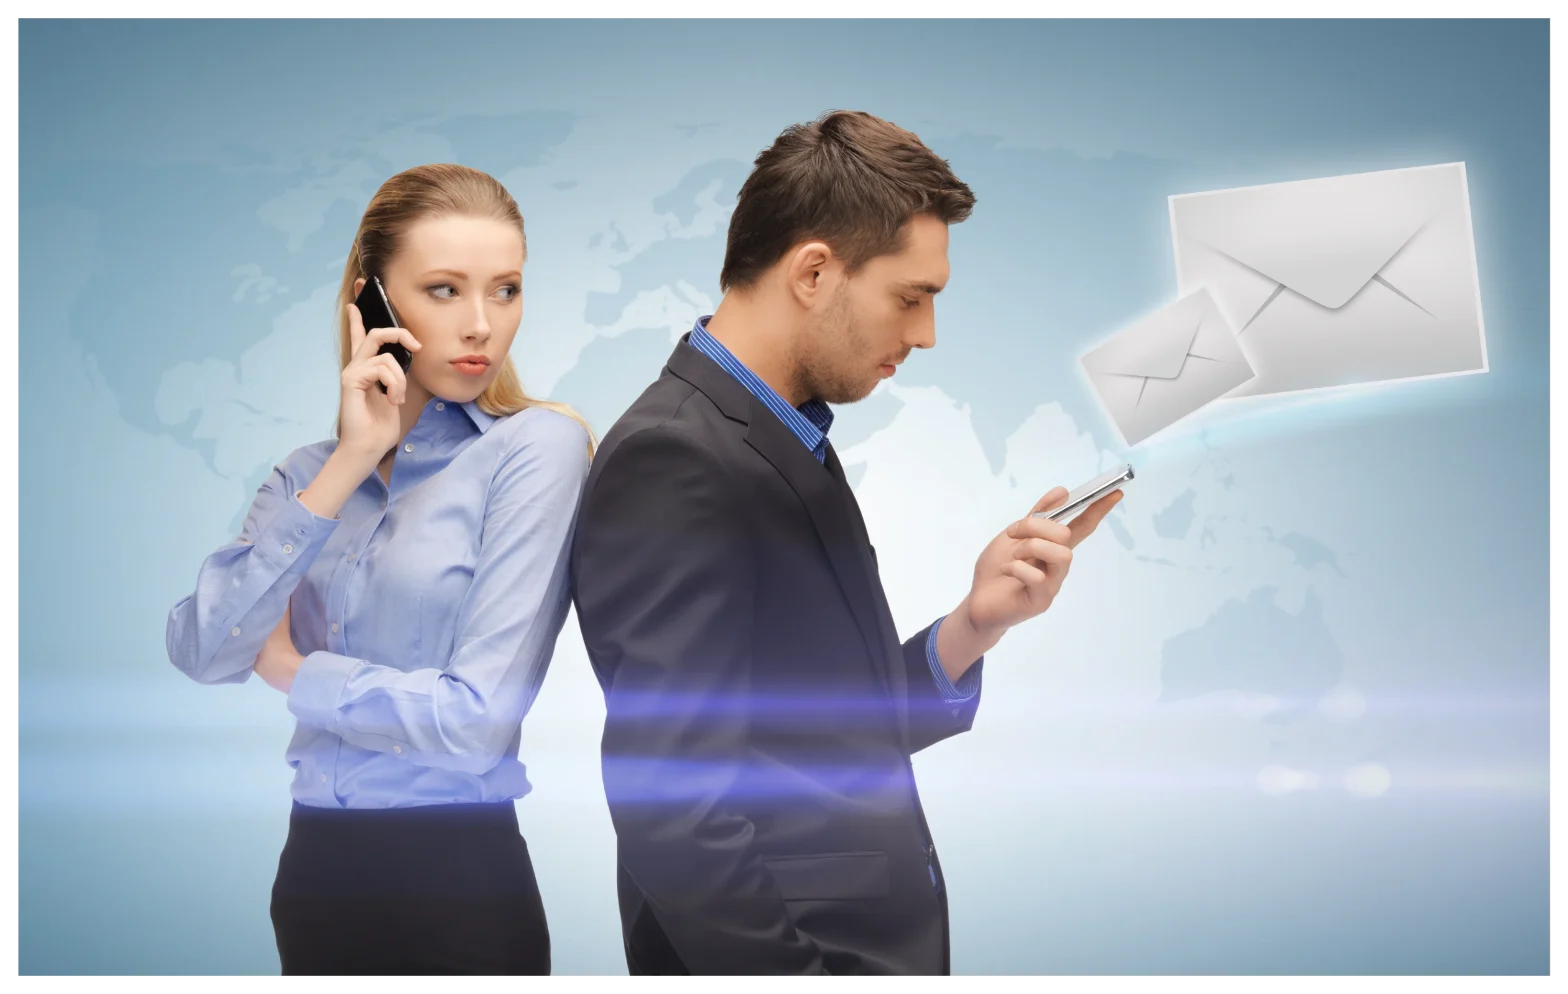 Demand Generation In Pandemic: Email vs Telemarketing